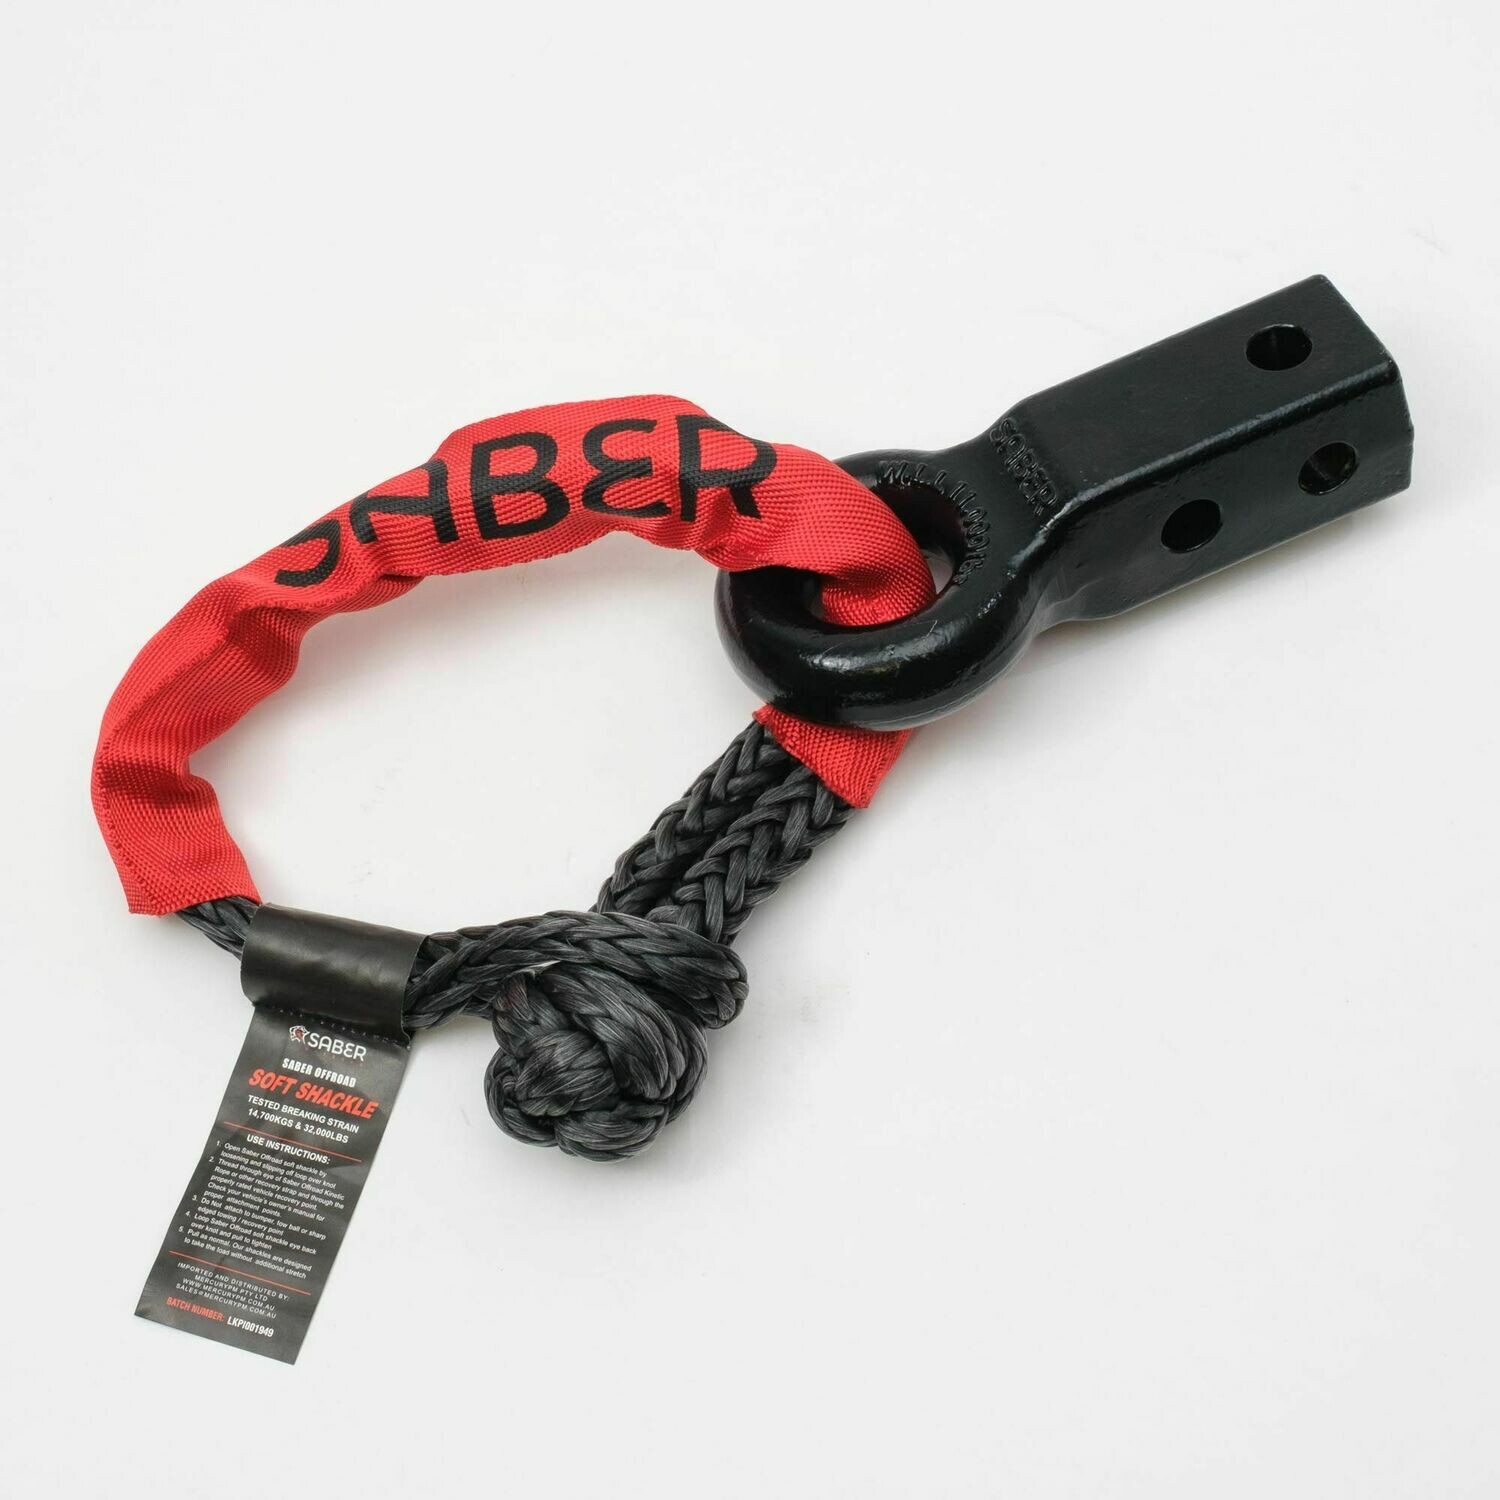 Saber Rope Friendly Recovery Hitch – Cast Steel & Sheath Shackle